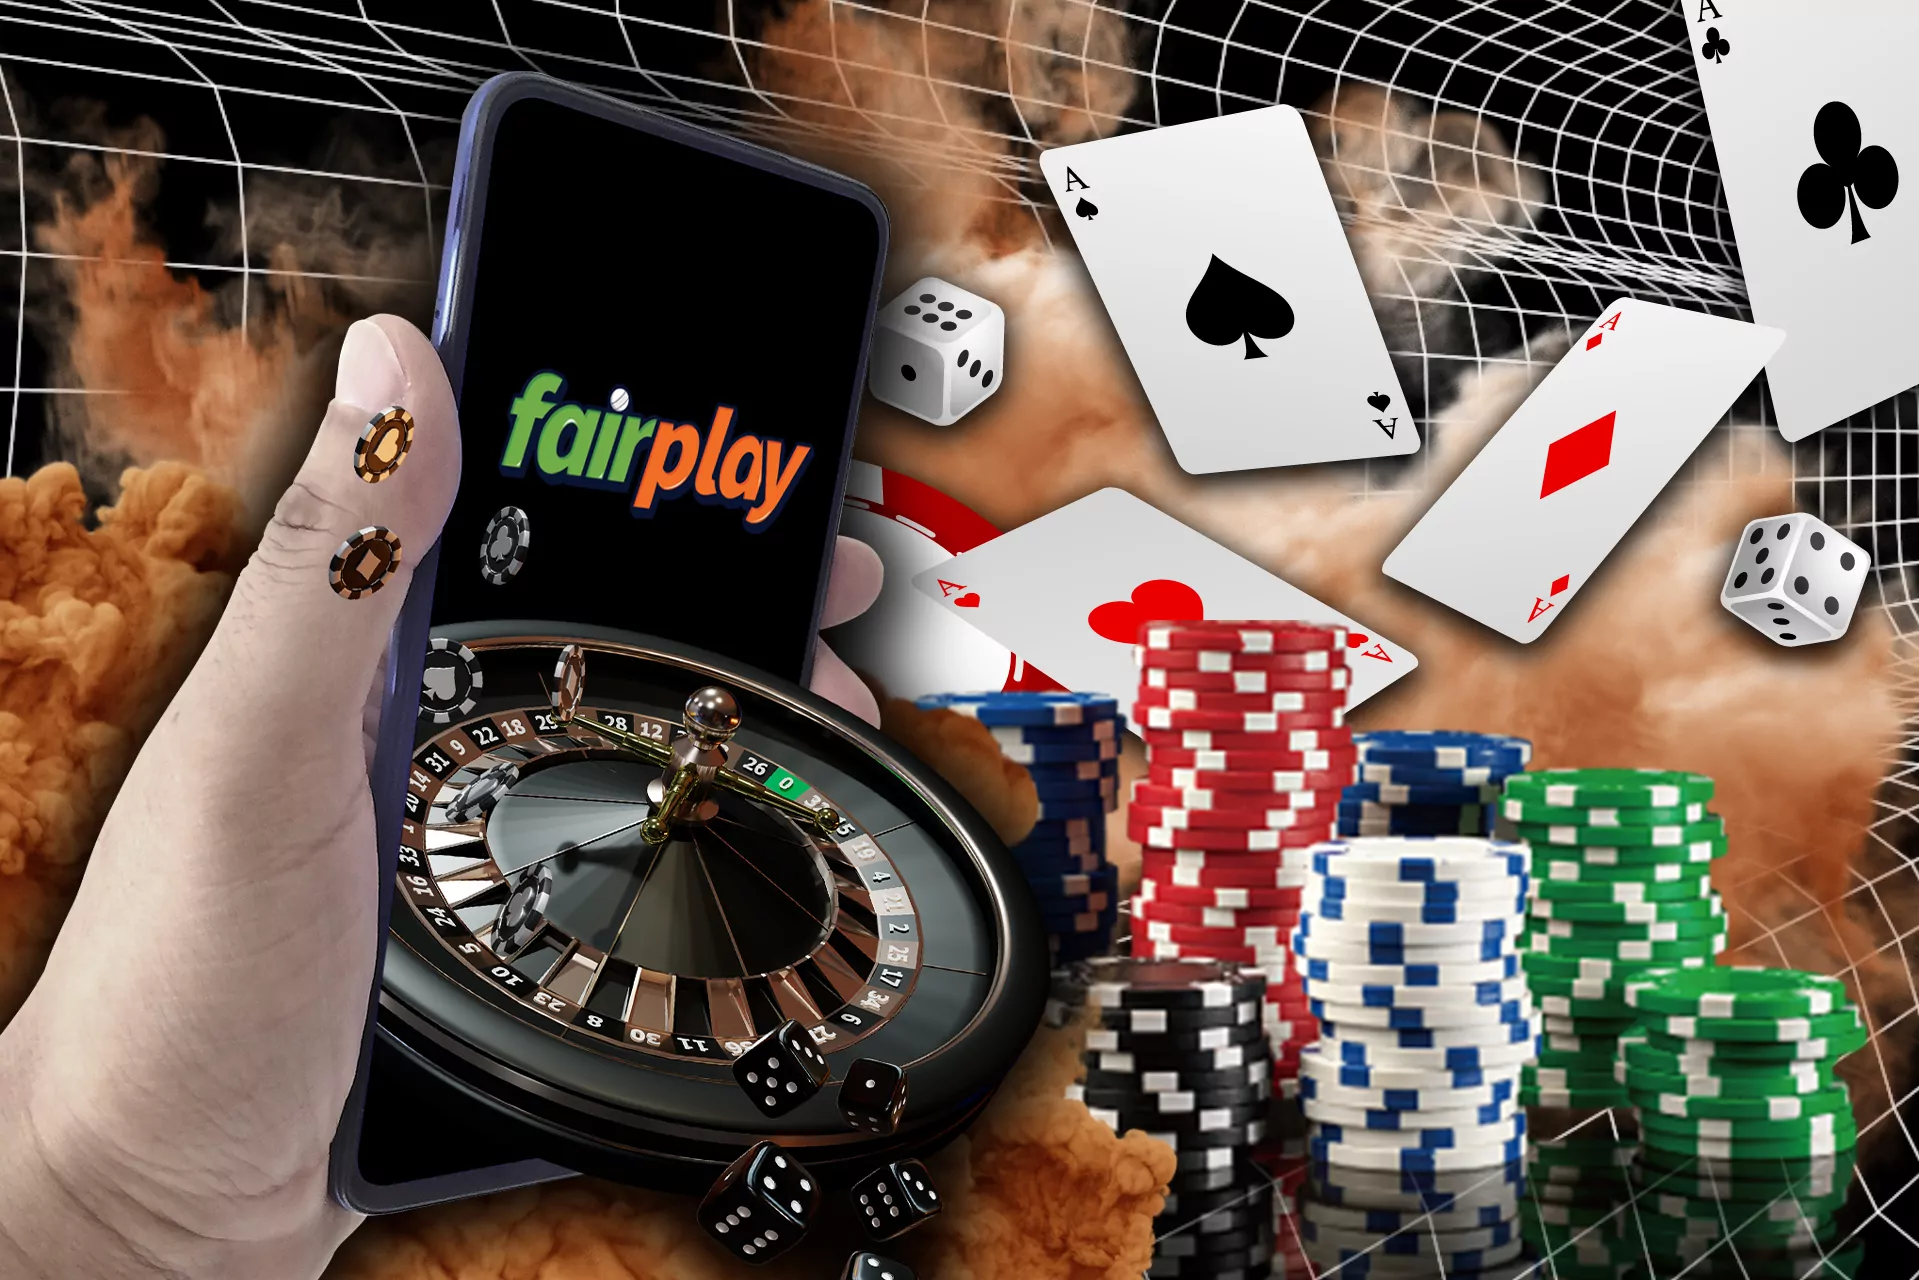 Play online casino games in the Fairplay app.